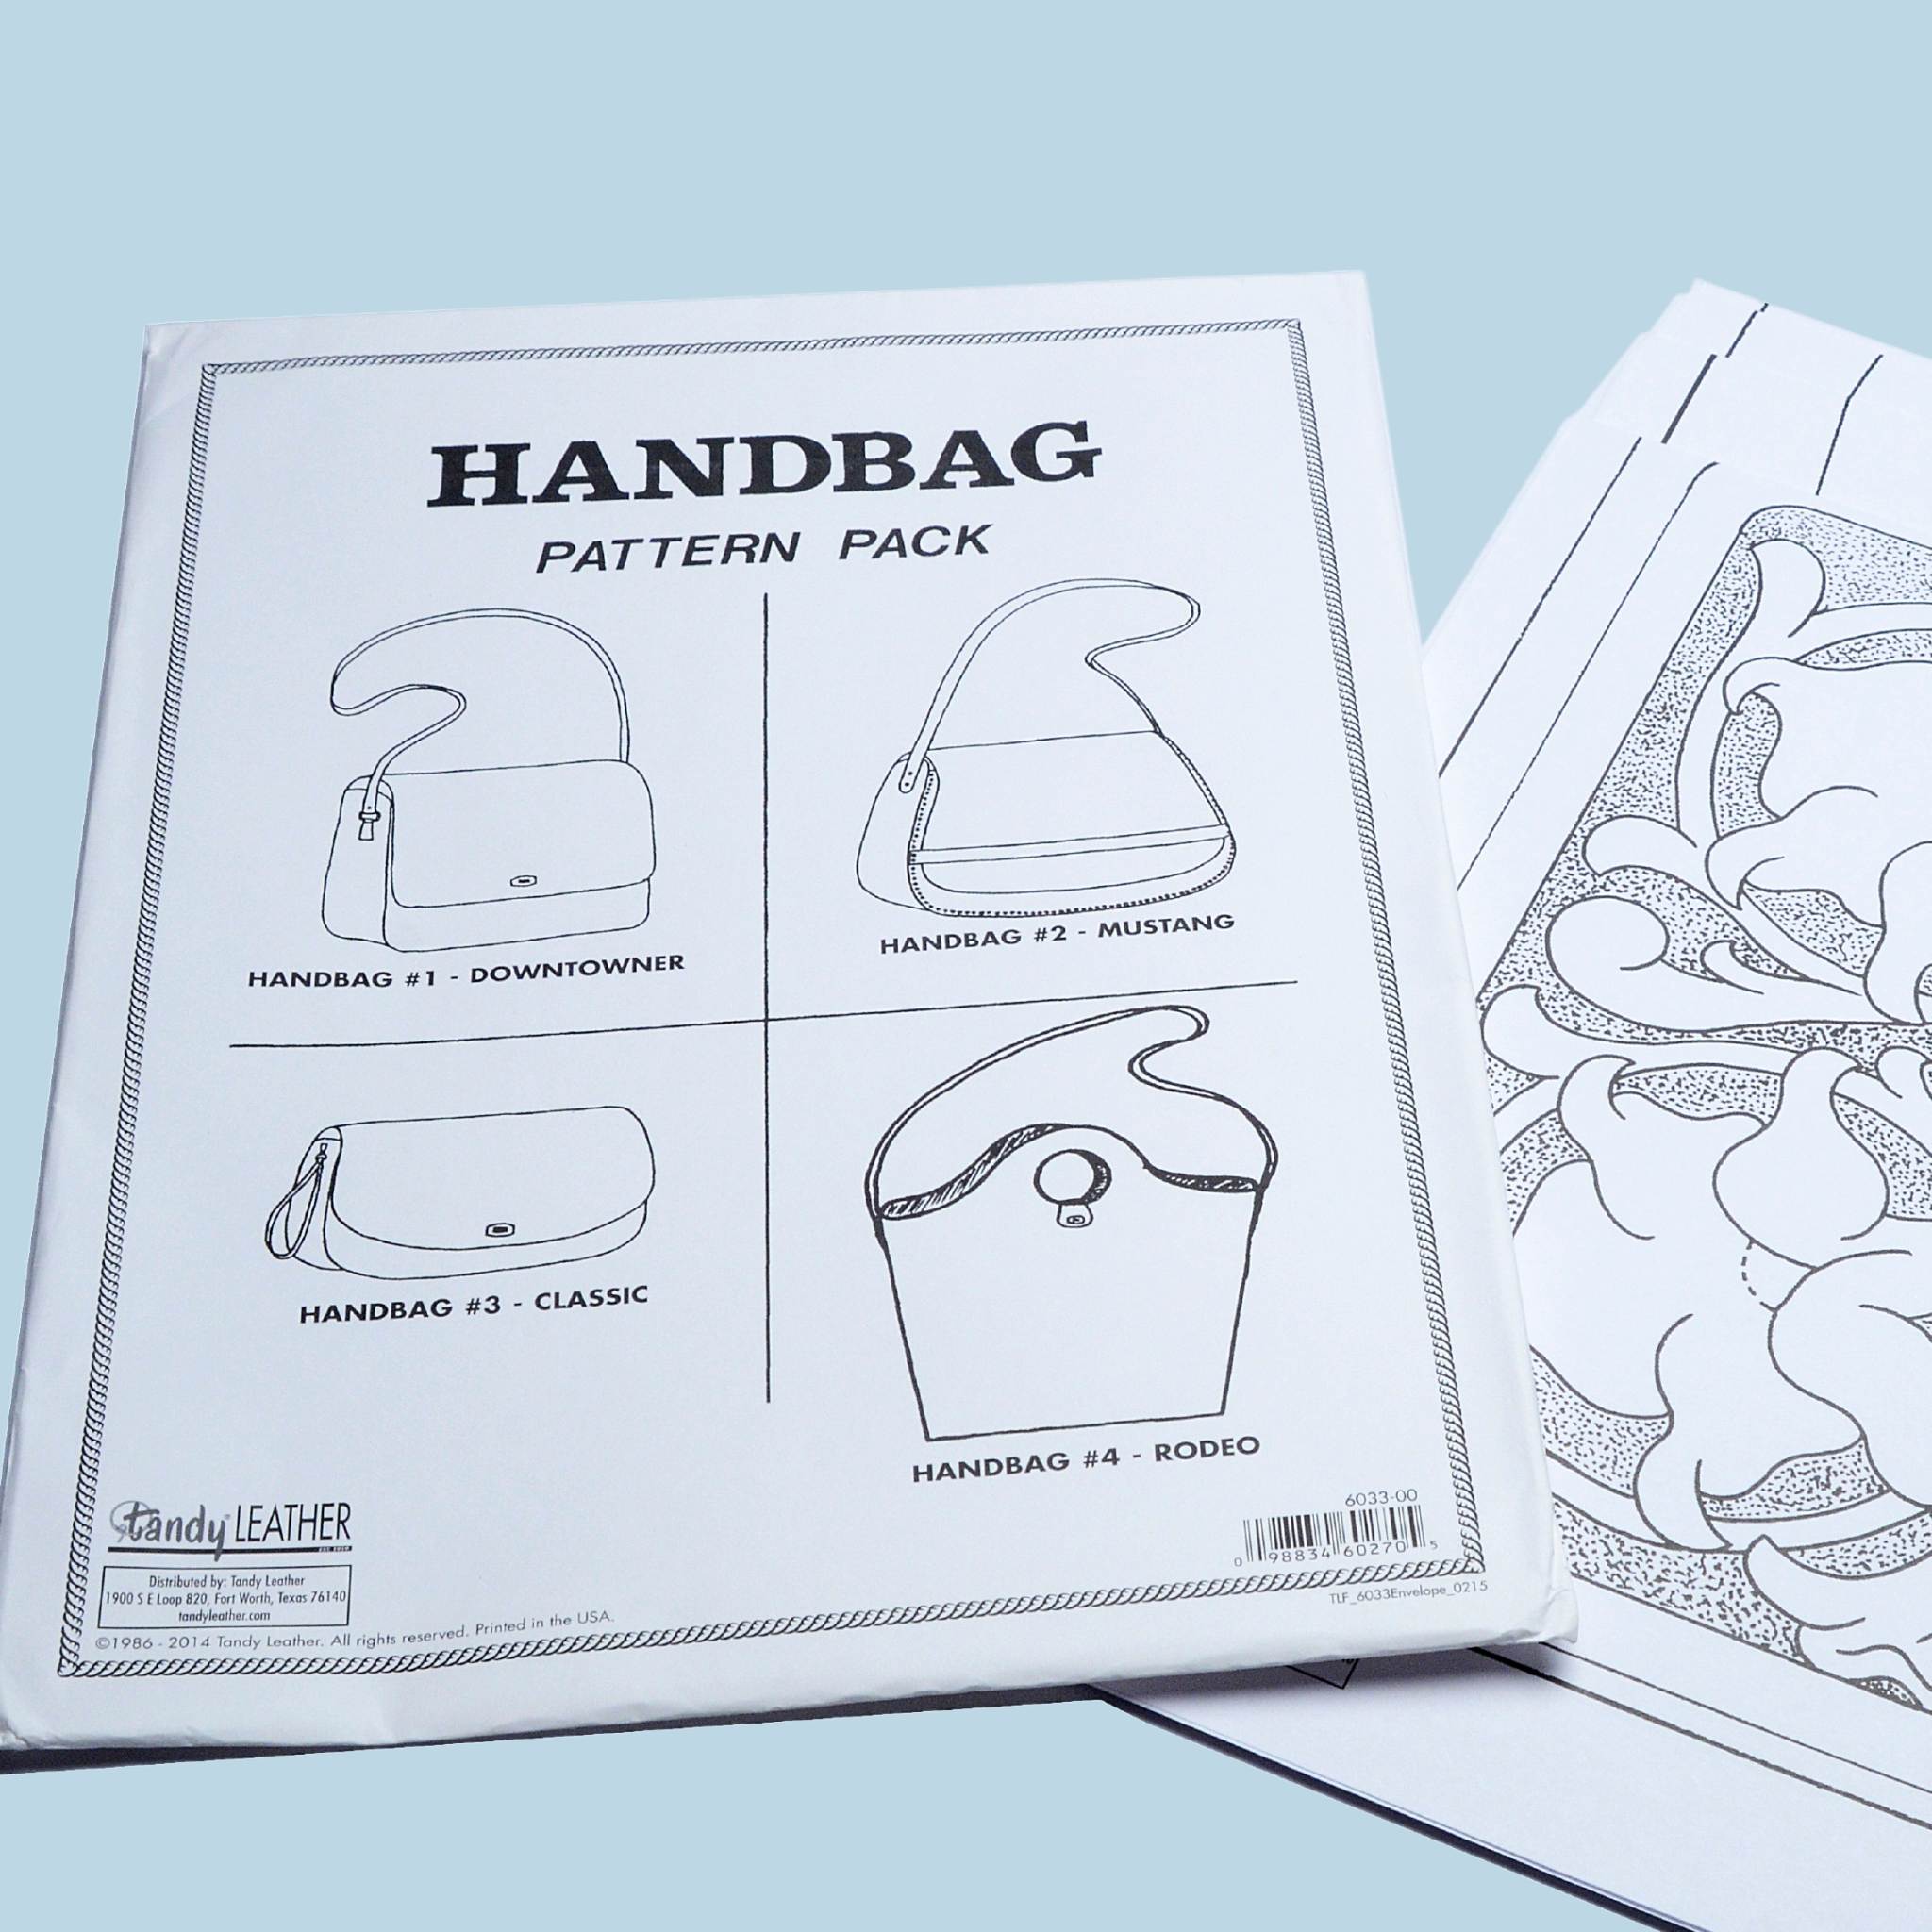 Make your own leather handbag with this paper pattern pack detailing the leathers required and more.  The pack includes paper pattern templates for 4 handbag designs - The Classic, Downtowner, Mustang and Rodeo, with detailed instructions for each, and includes a Sheridan style tooling pattern.